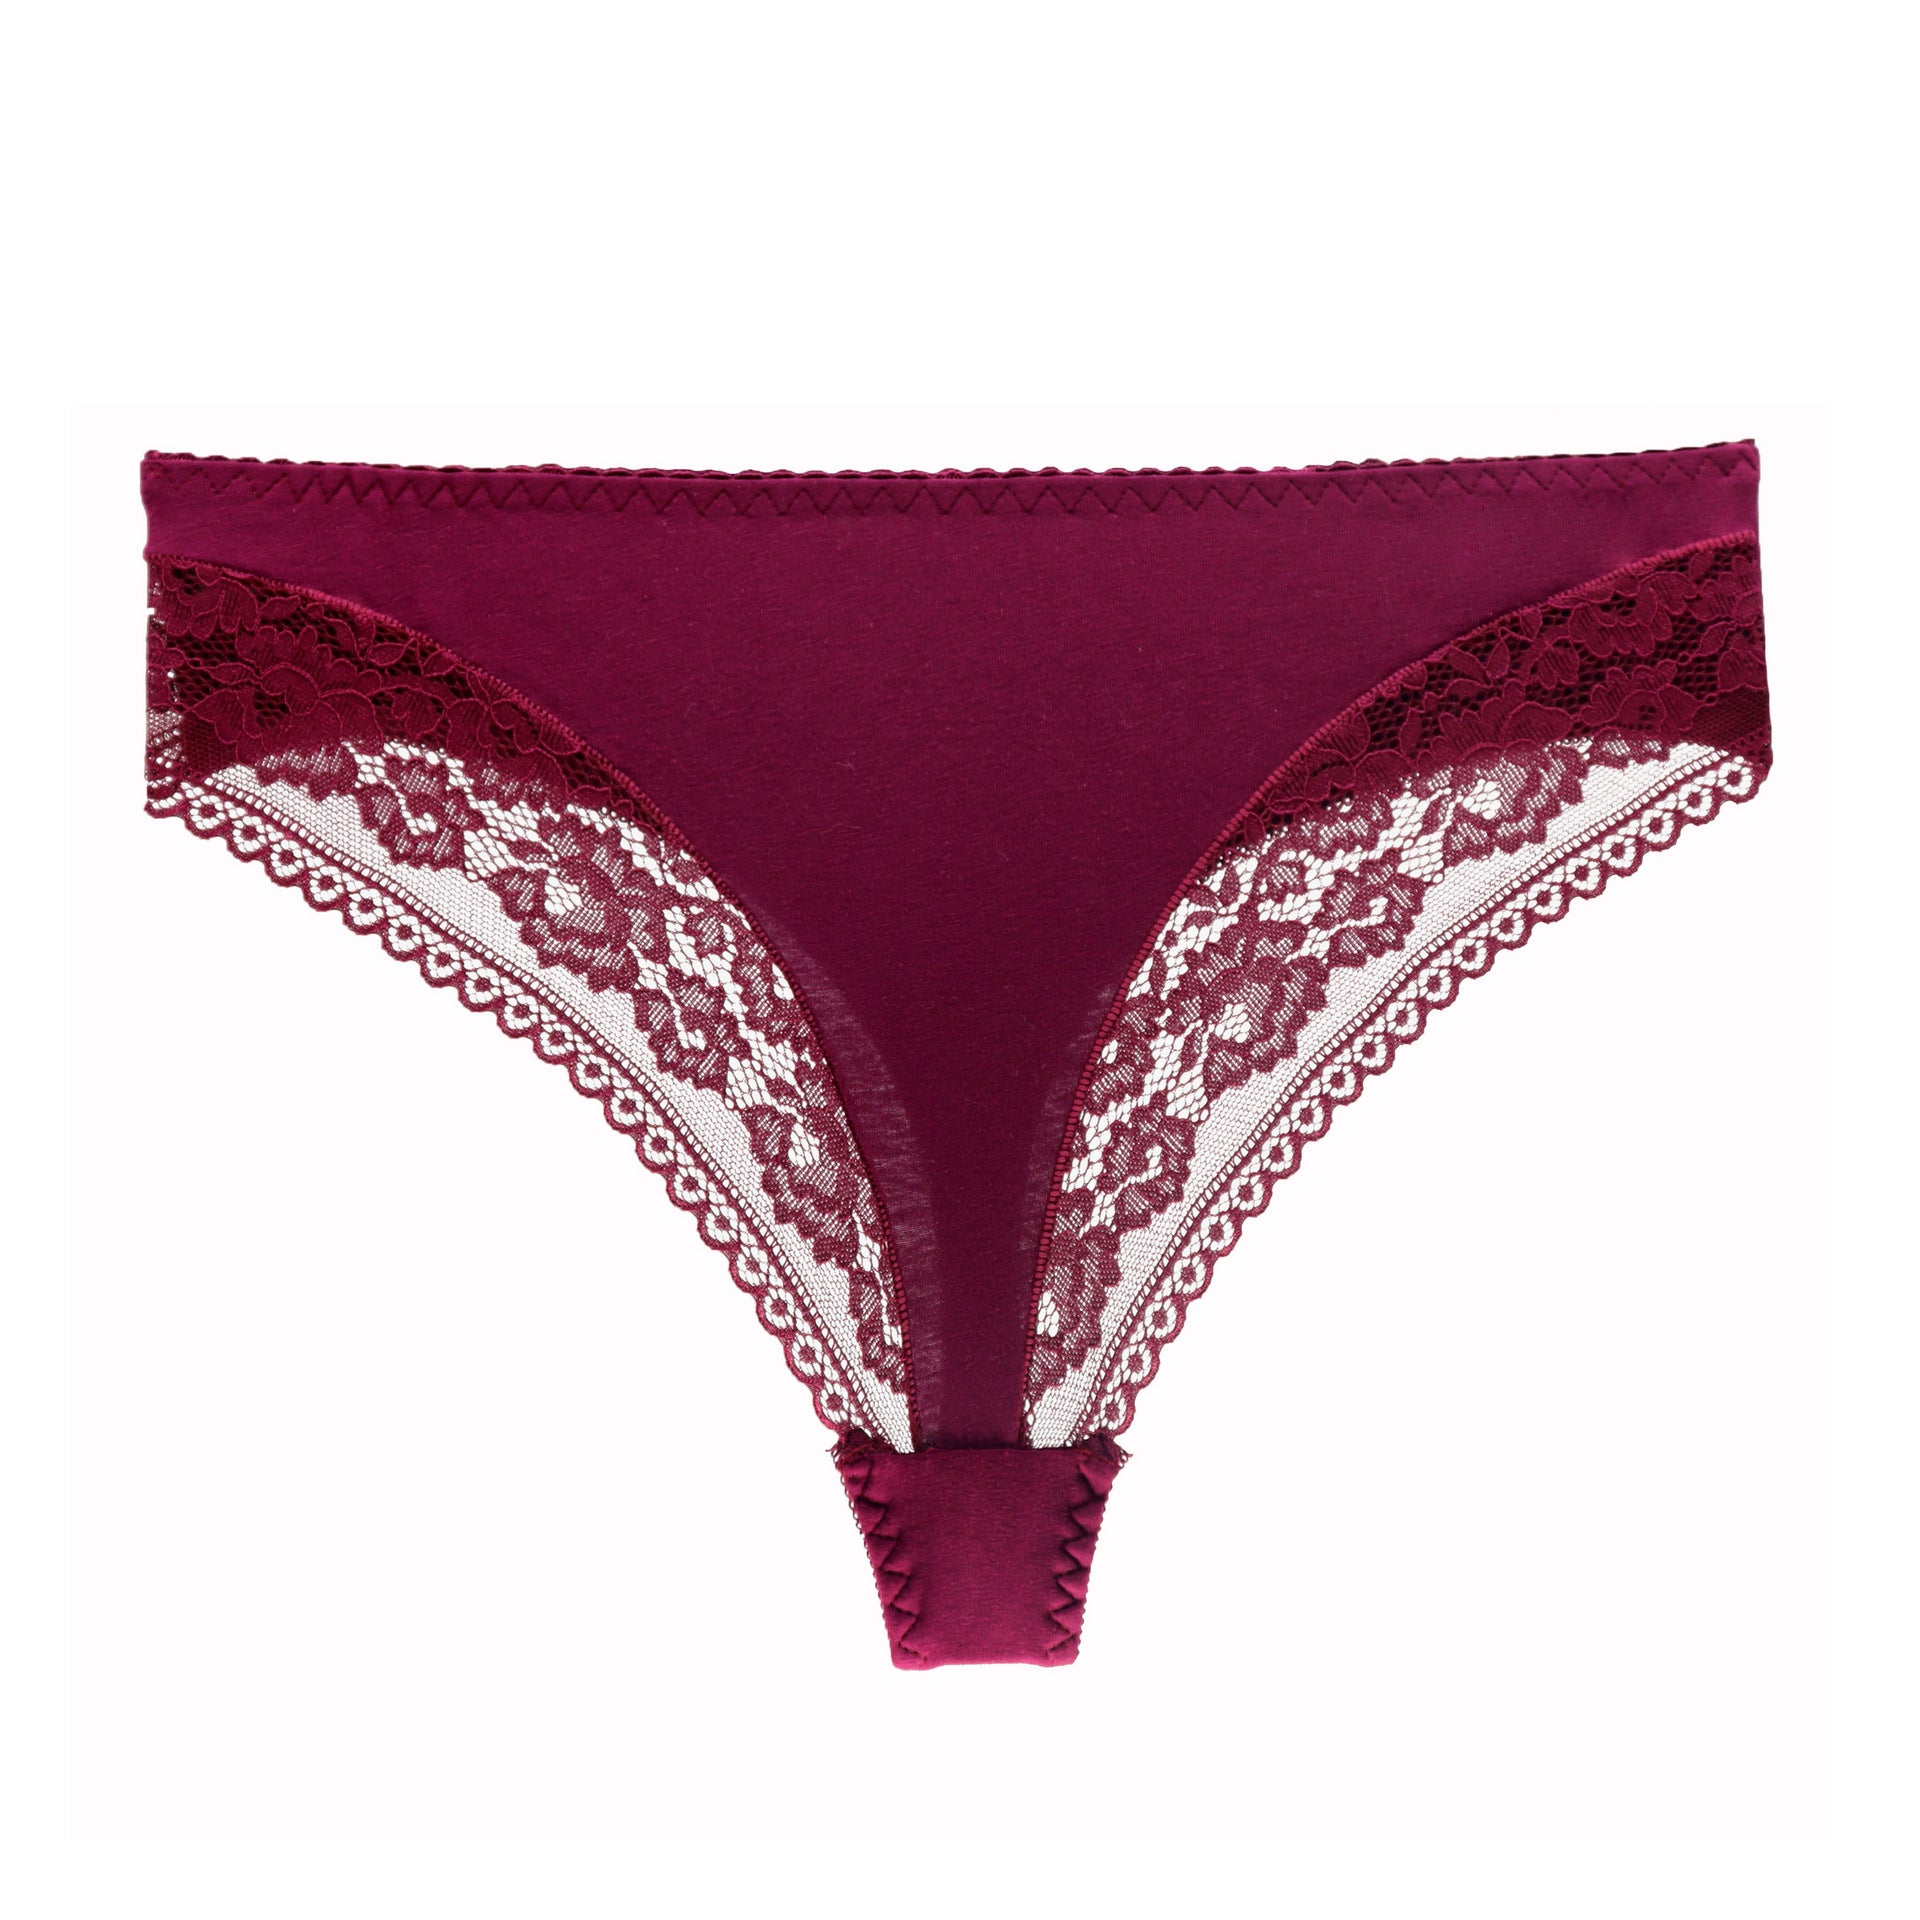 Front Side Lace Thong G-string Panty